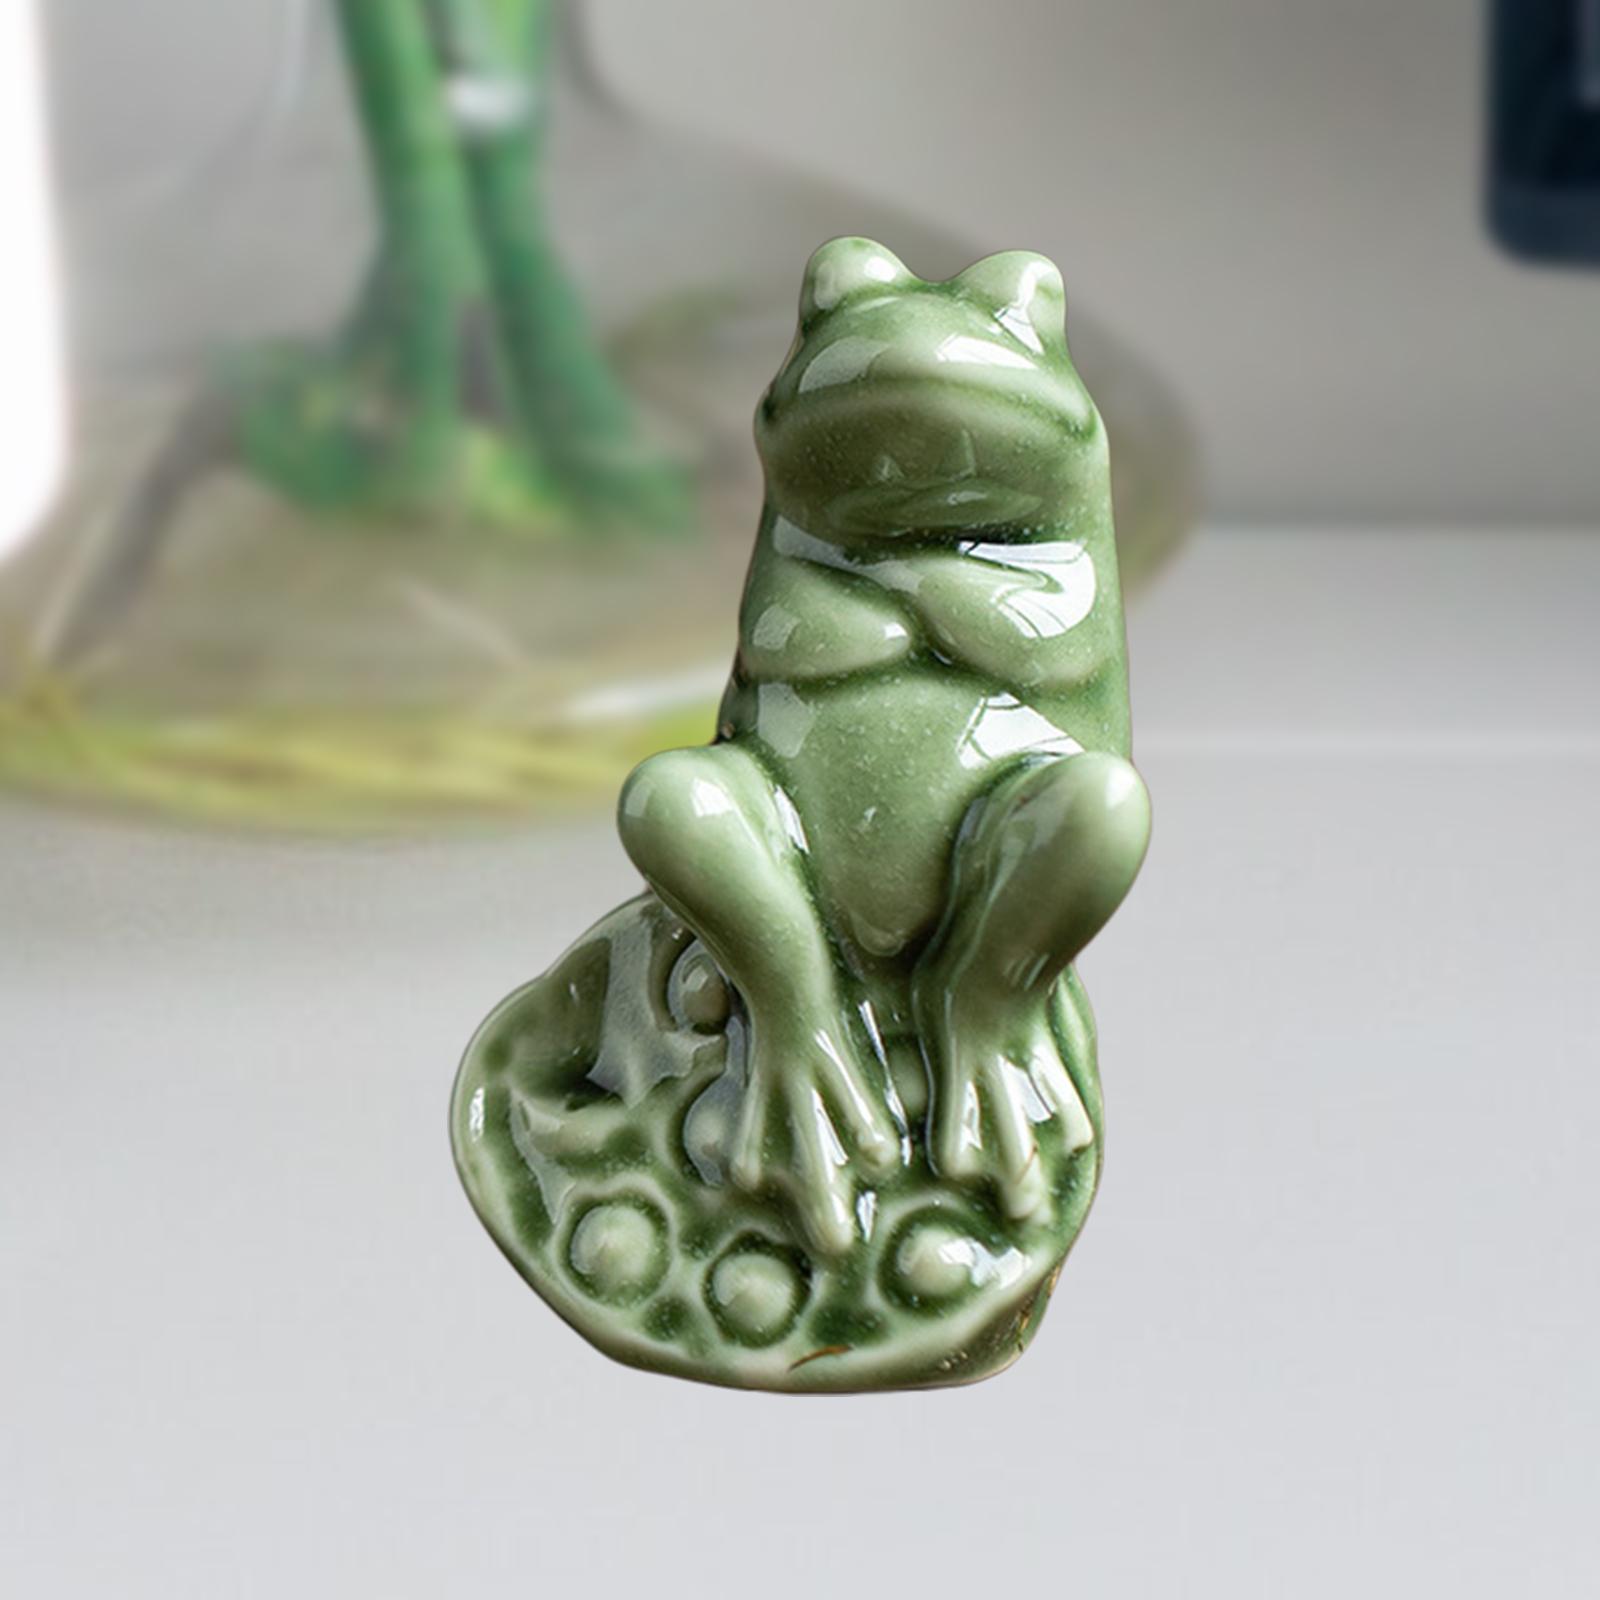 Miniature Frog Figurine Tea Pet Sculpture Small Frog Statue for Table Office Style C 4x3.5x5.9cm